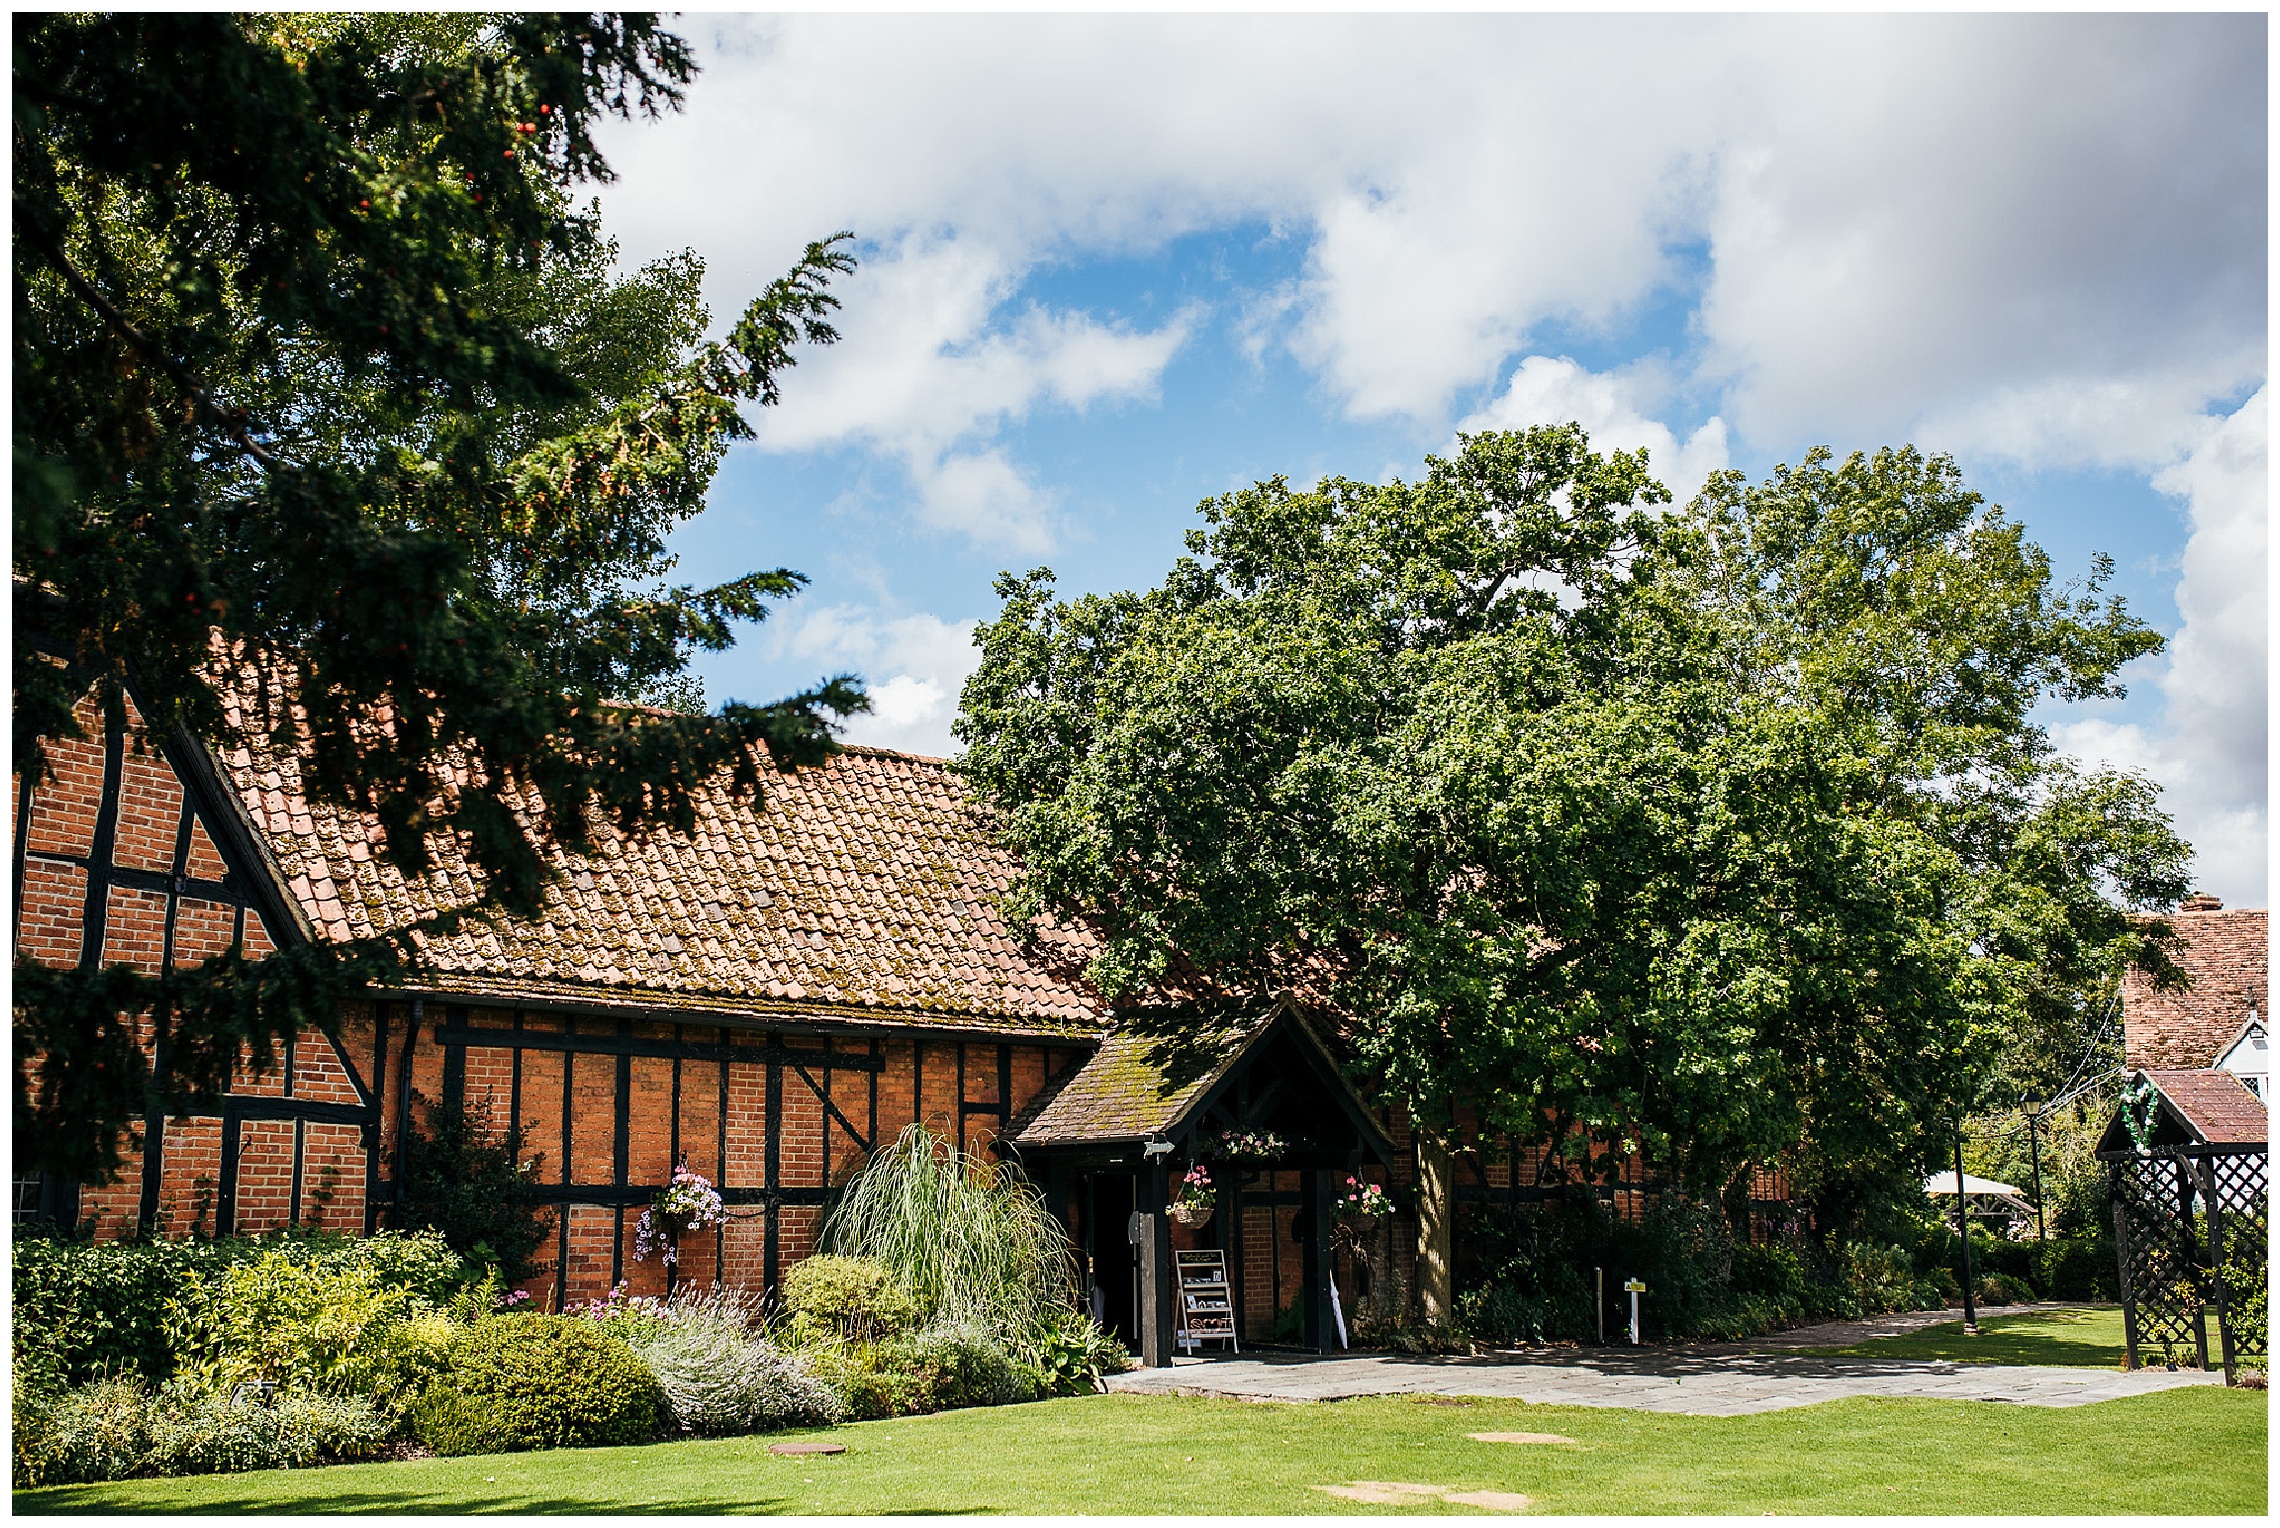 barns bedford wedding venue tudor style surrounded by grass